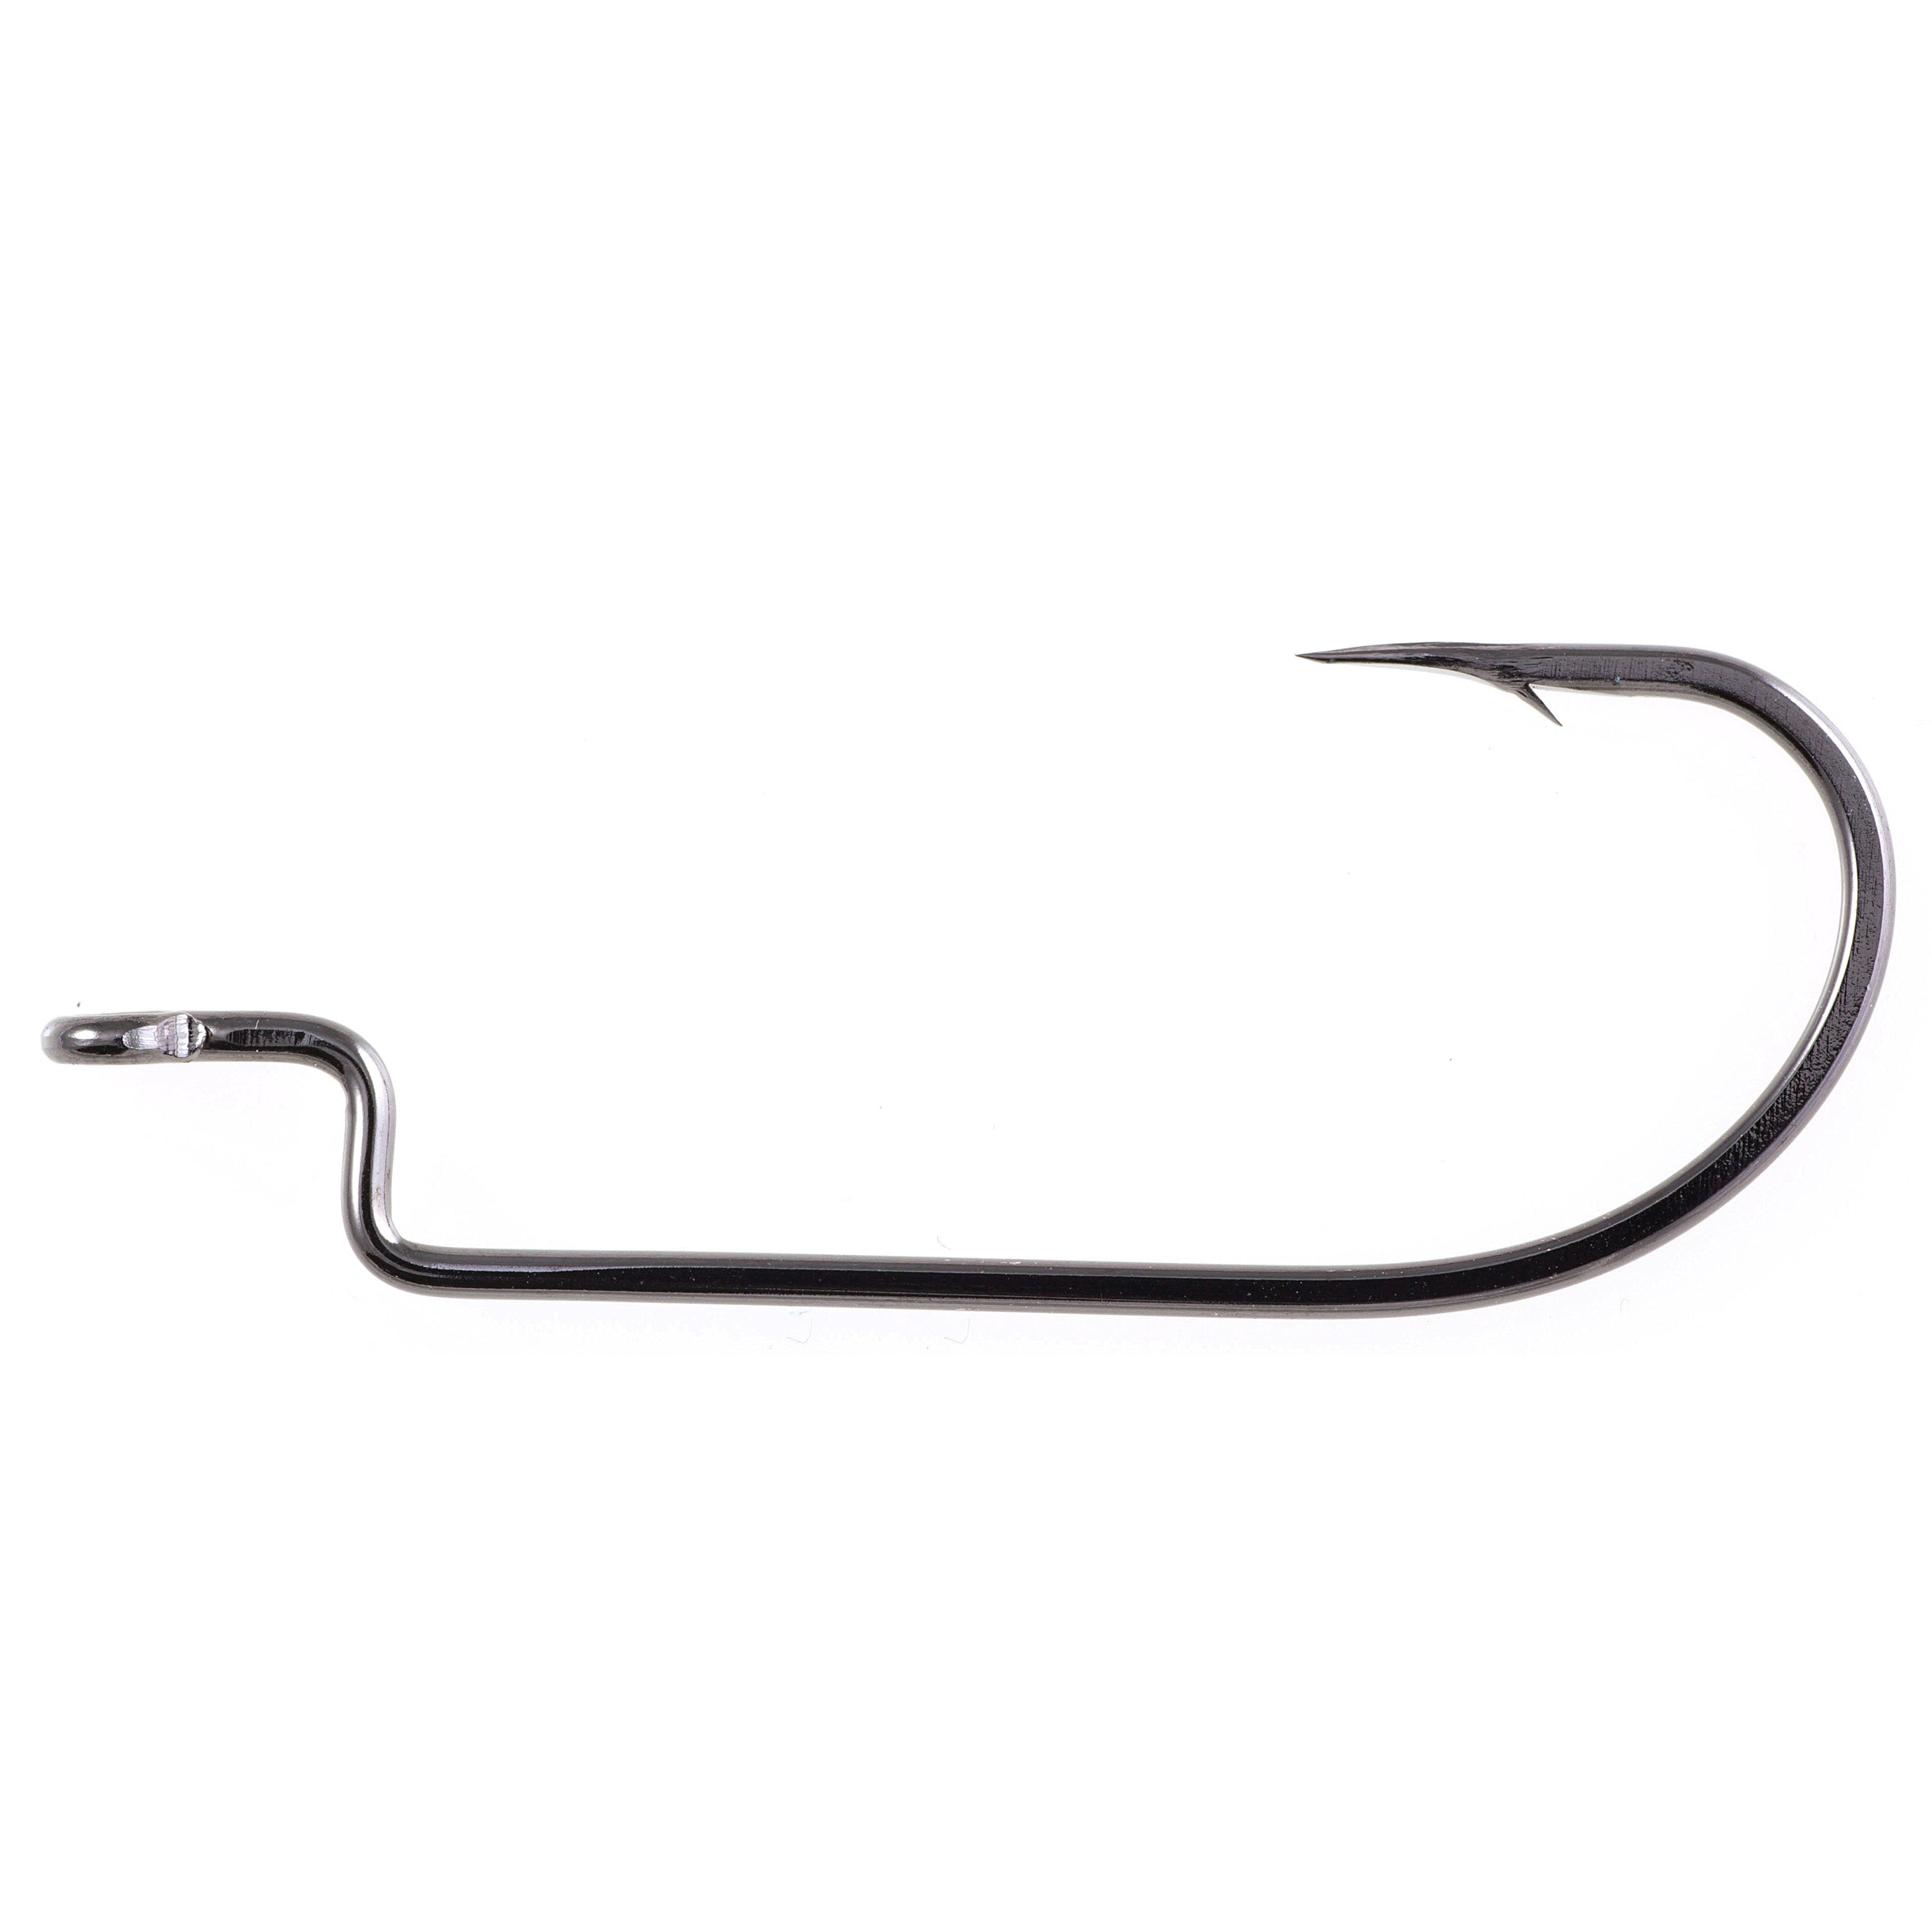 Hooks(Terminal Tackle) – Tagged Size_4/0 – Page 2 – Capt. Harry's Fishing  Supply